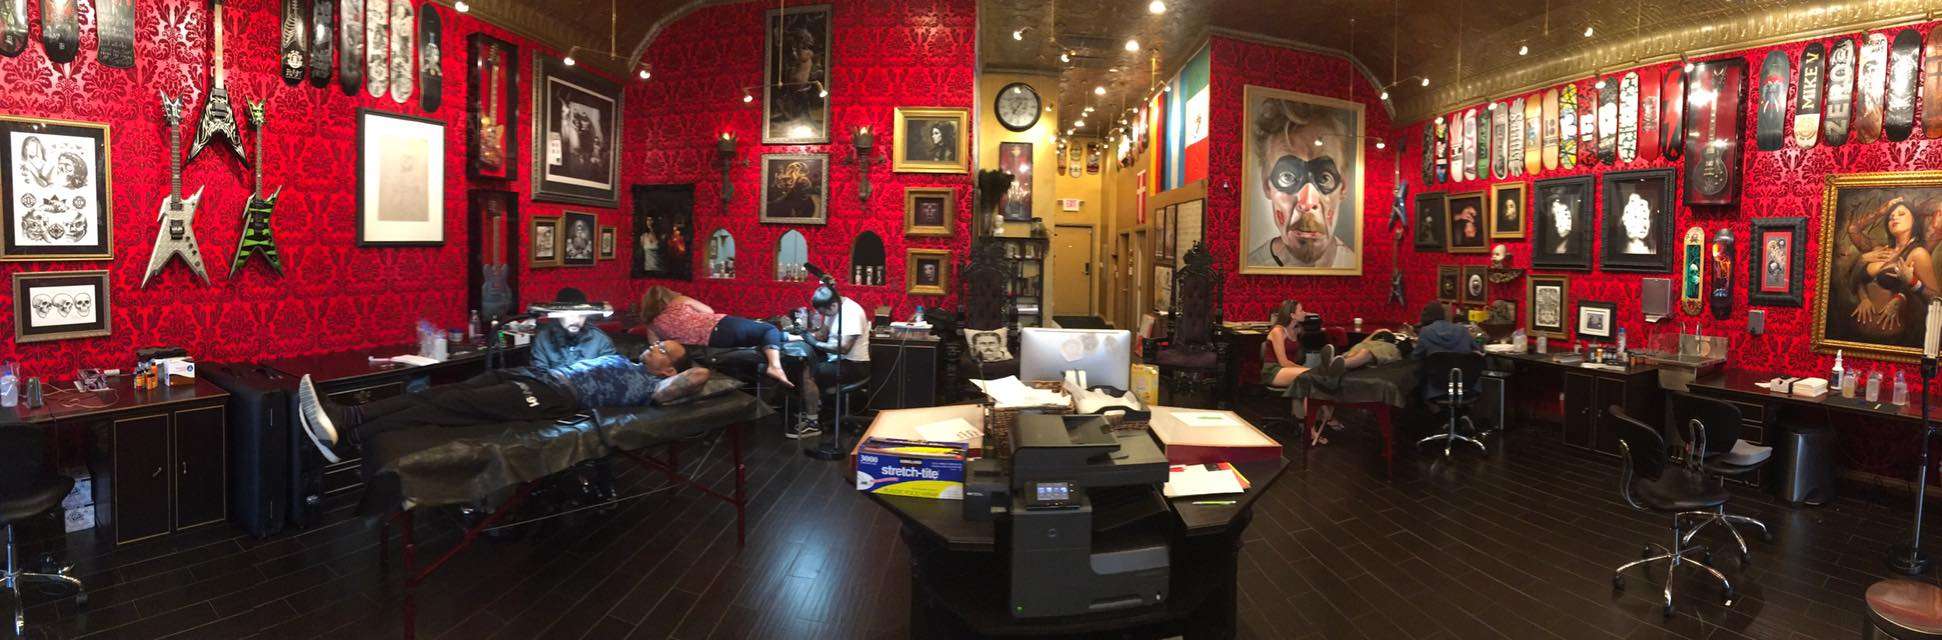 Kat Von D is Closing High Voltage Tattoo Studio WeHo - WEHO TIMES West Hollywood News, Nightlife and Events